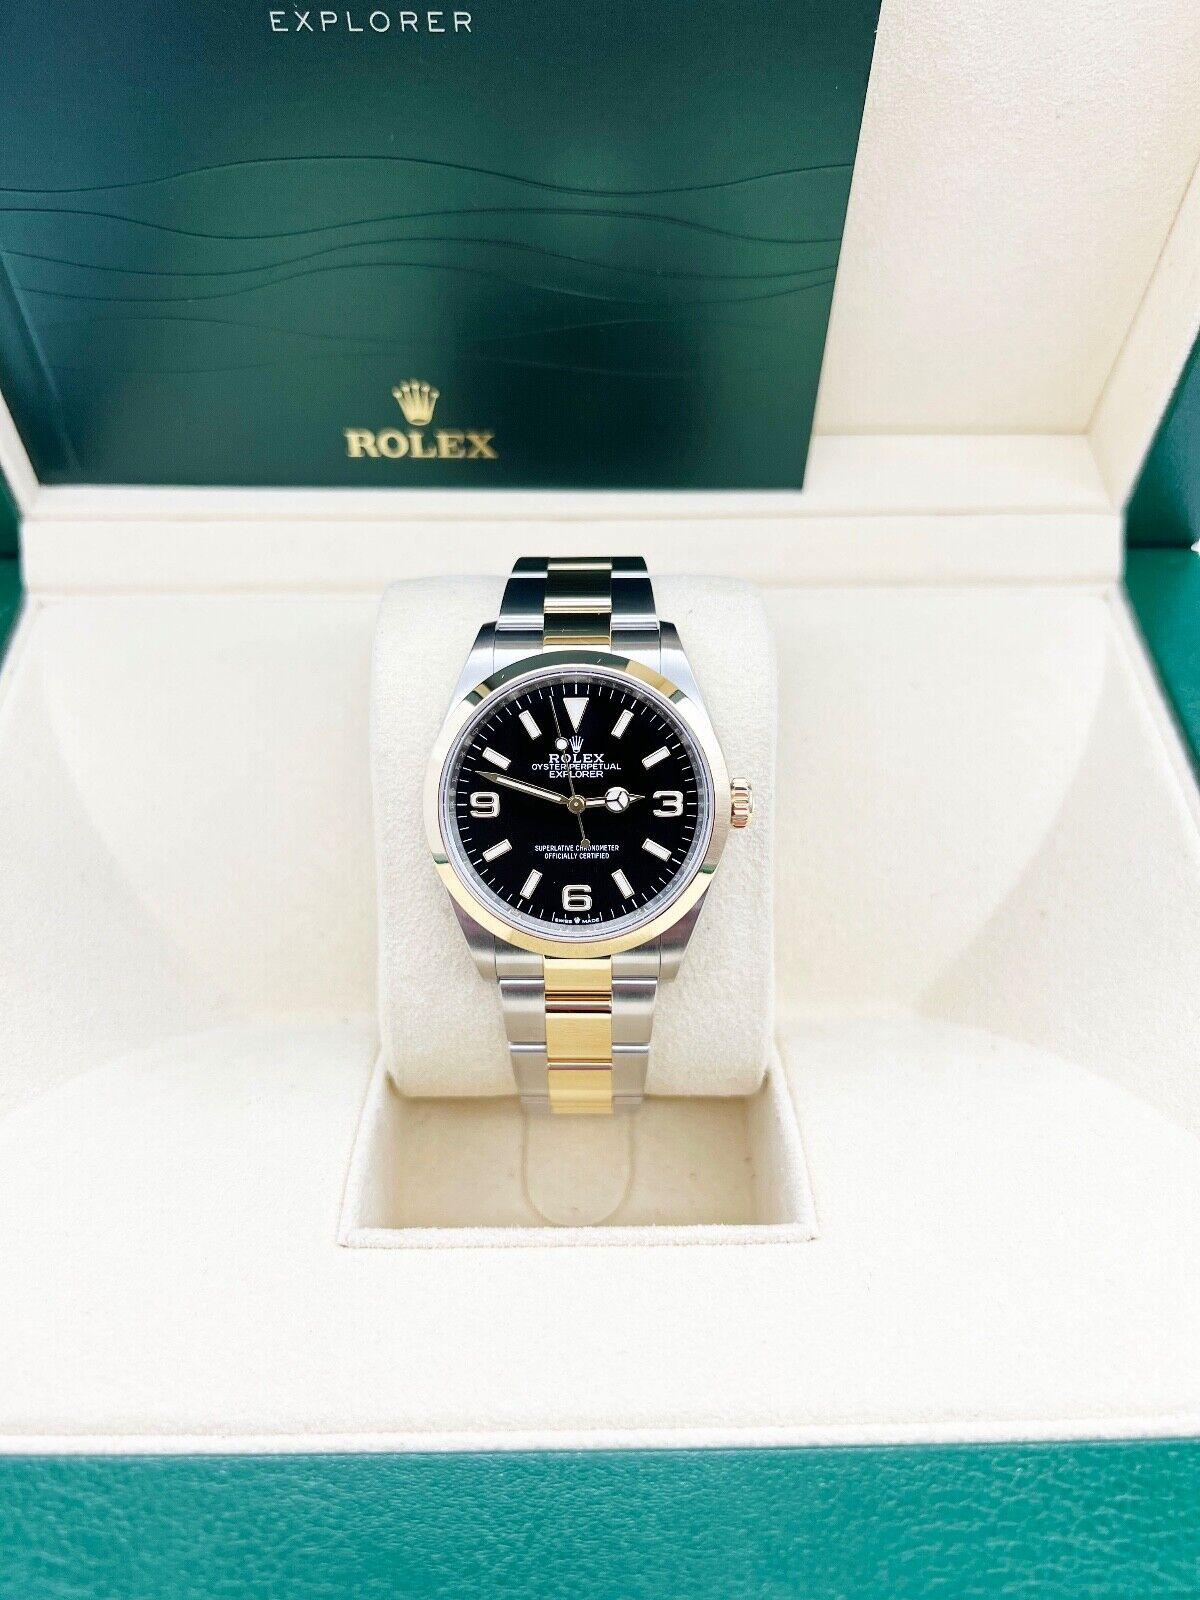 Rolex Explorer 124273 Black Dial 18K Yellow Gold Steel Box Booklet 36mm For Sale 2